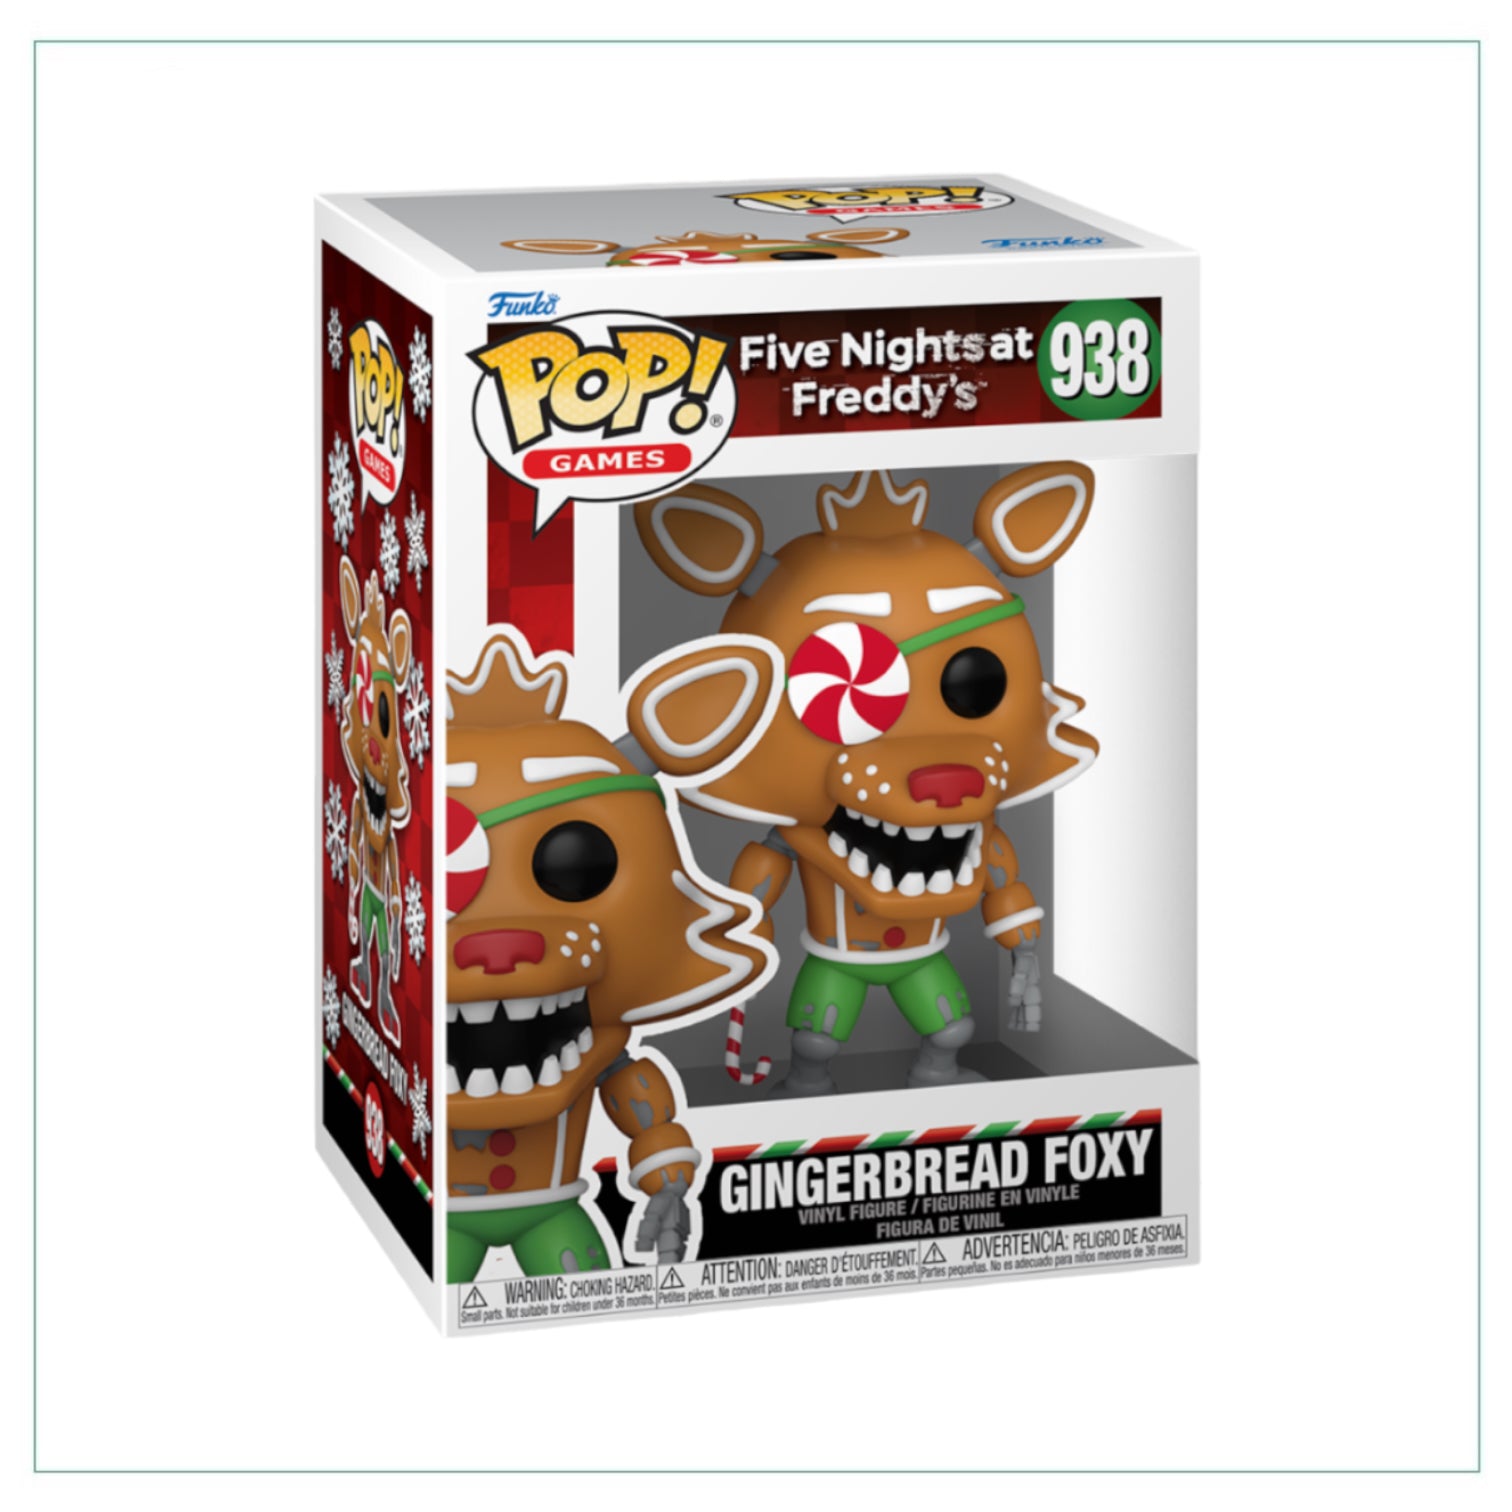 Gingerbread Foxy #938 Funko Pop! Five Nights at Freddy’s Holiday